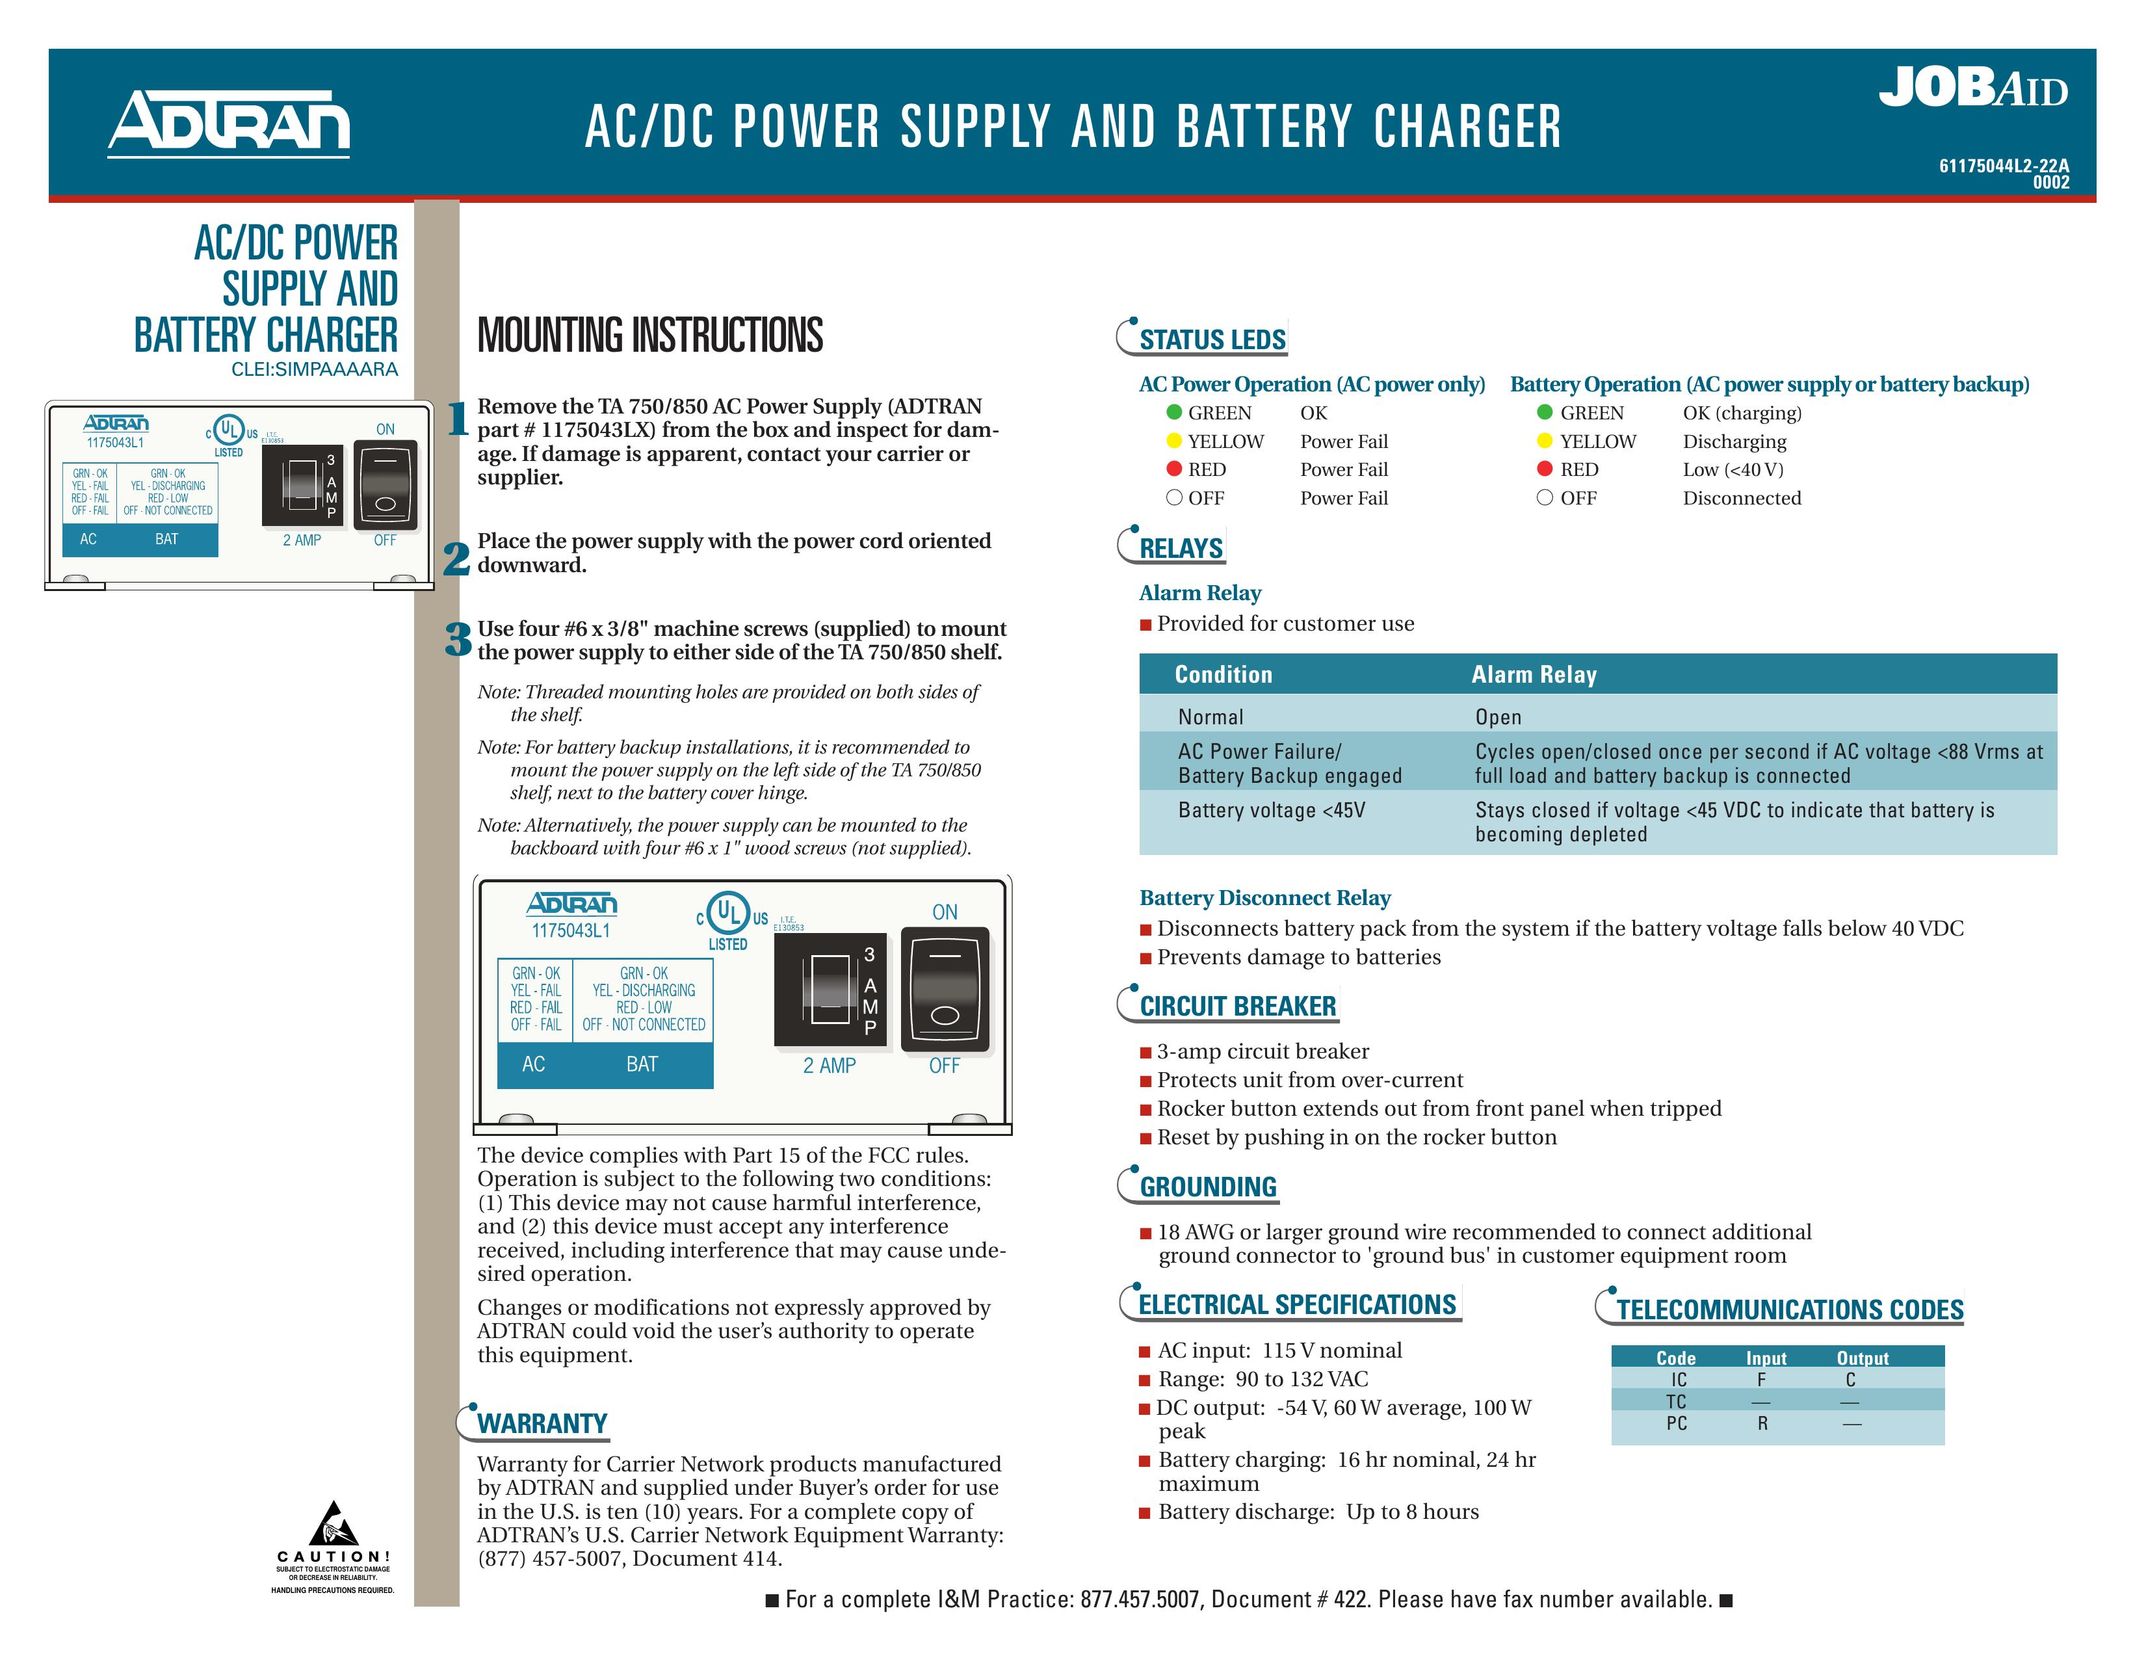 ADTRAN Power Supply/Battery Charger Power Supply User Manual